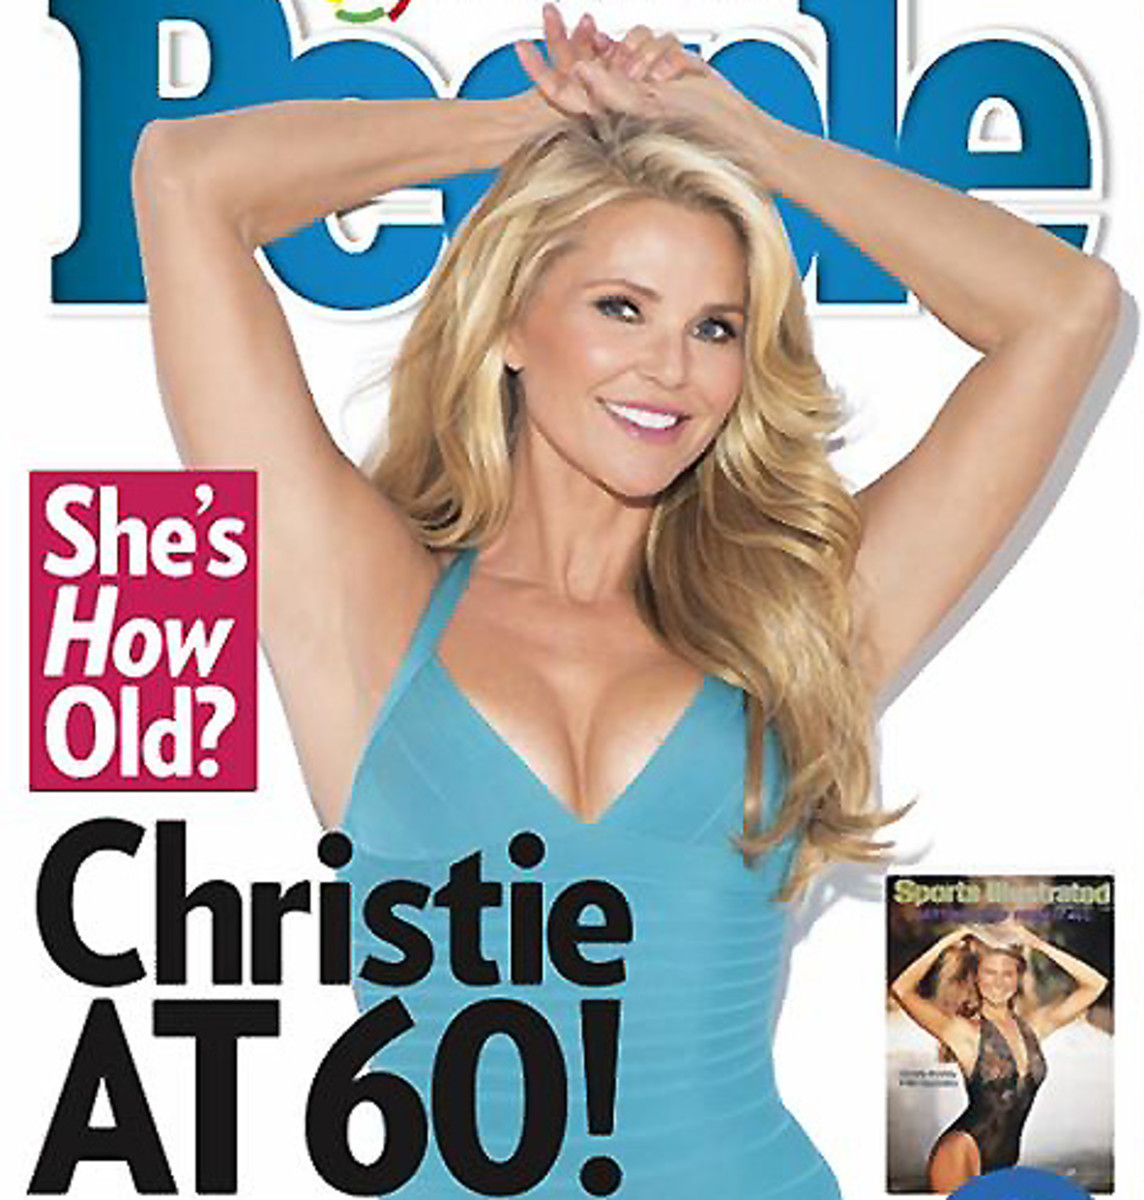 Christy Brinkley 60 hair is not all hers